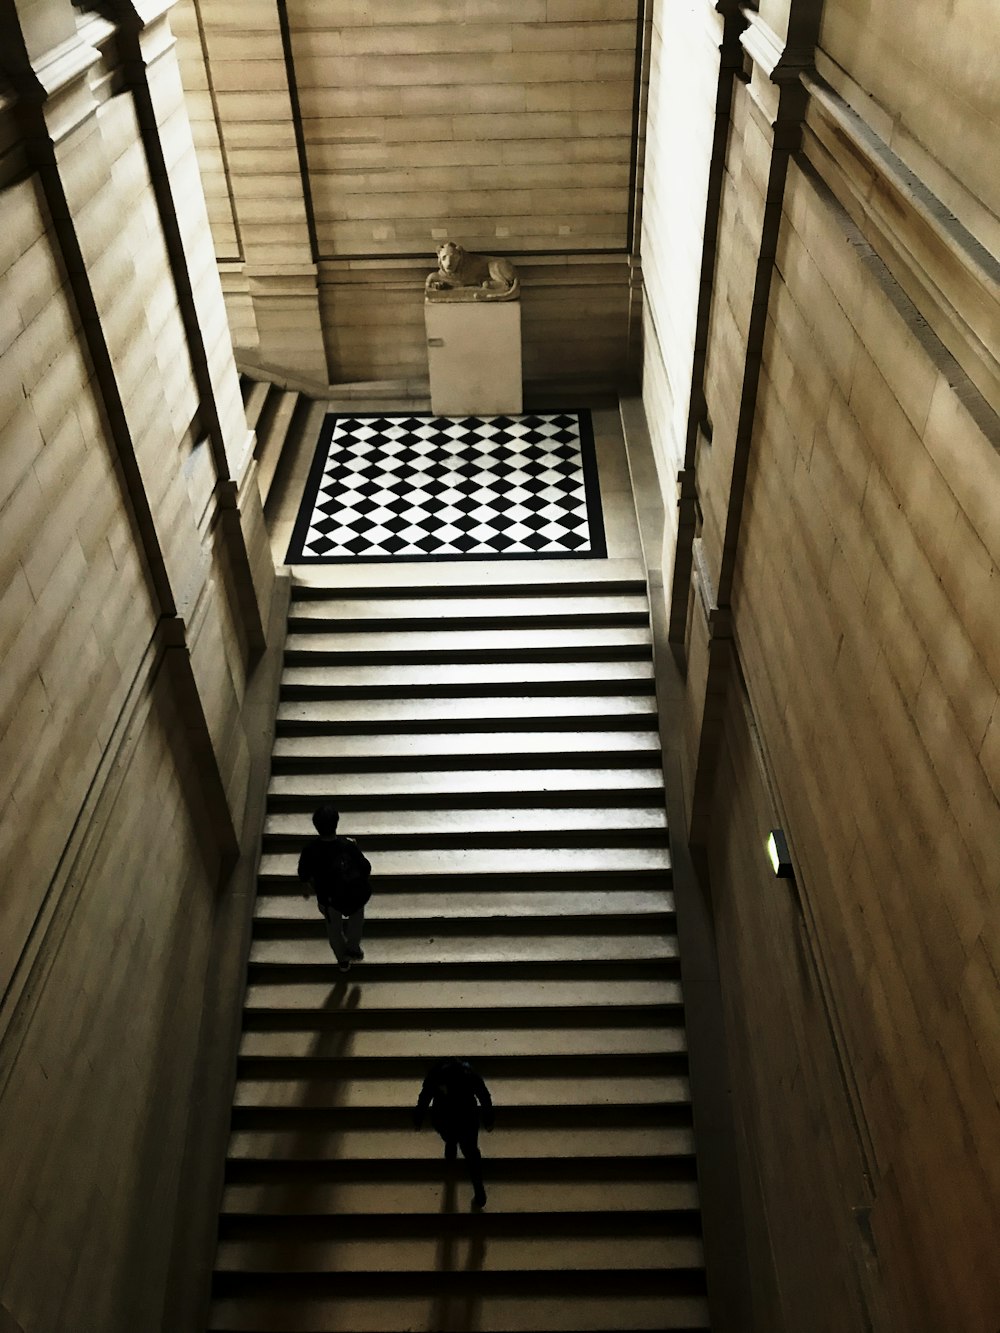 people walking on brown wooden staircase